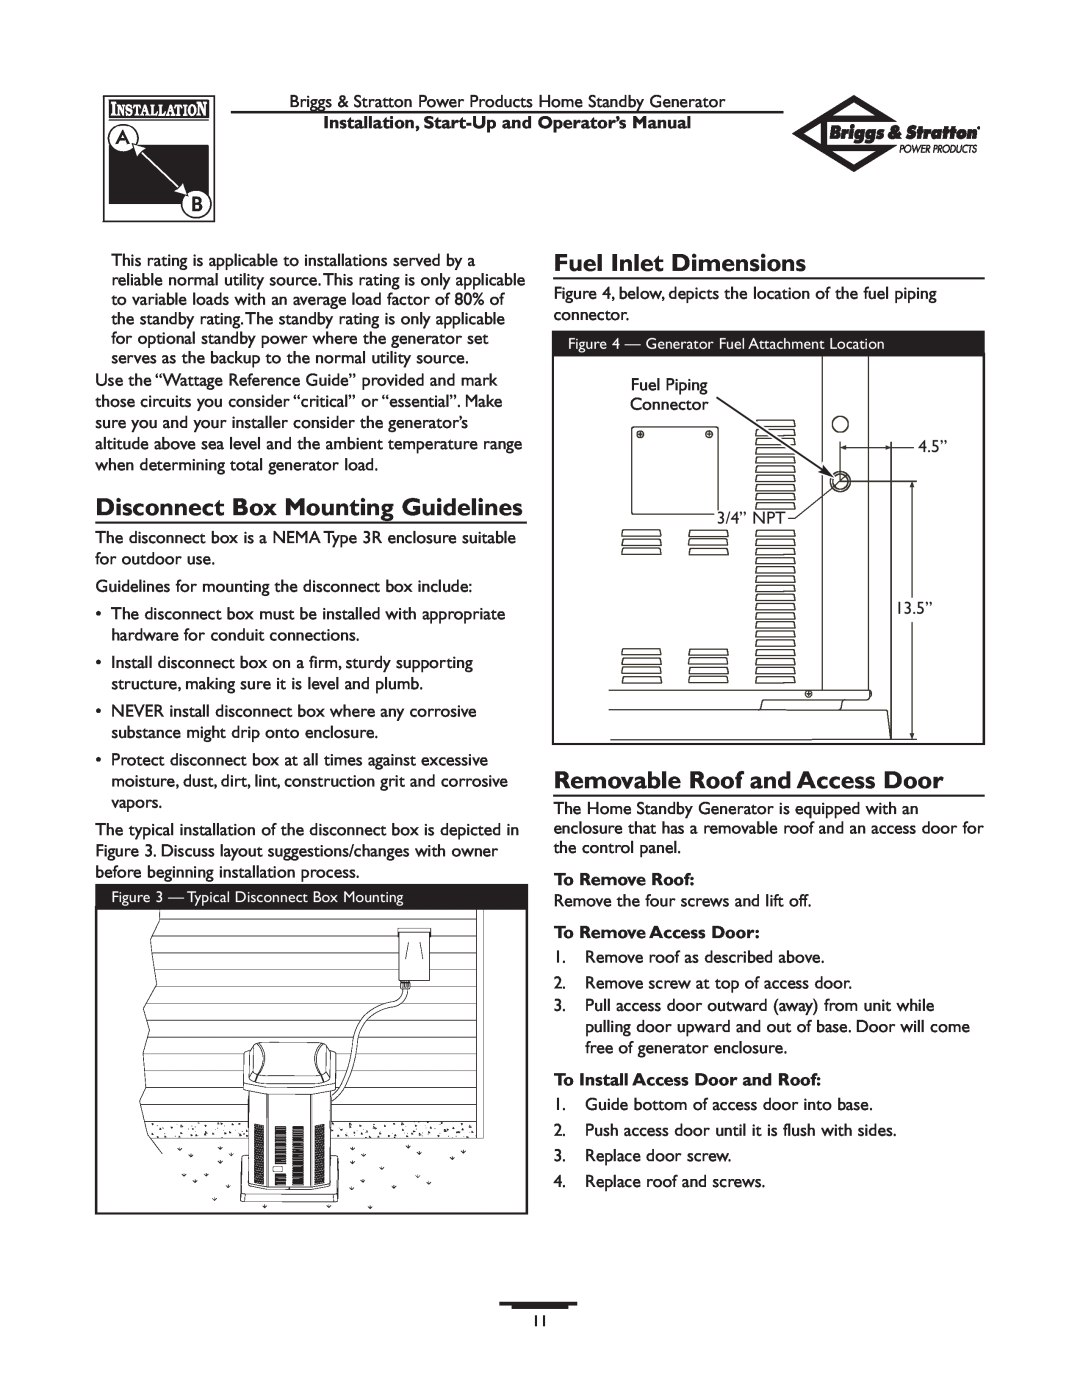 Briggs & Stratton 01897-0 manual Disconnect Box Mounting Guidelines, Fuel Inlet Dimensions, Removable Roof and Access Door 